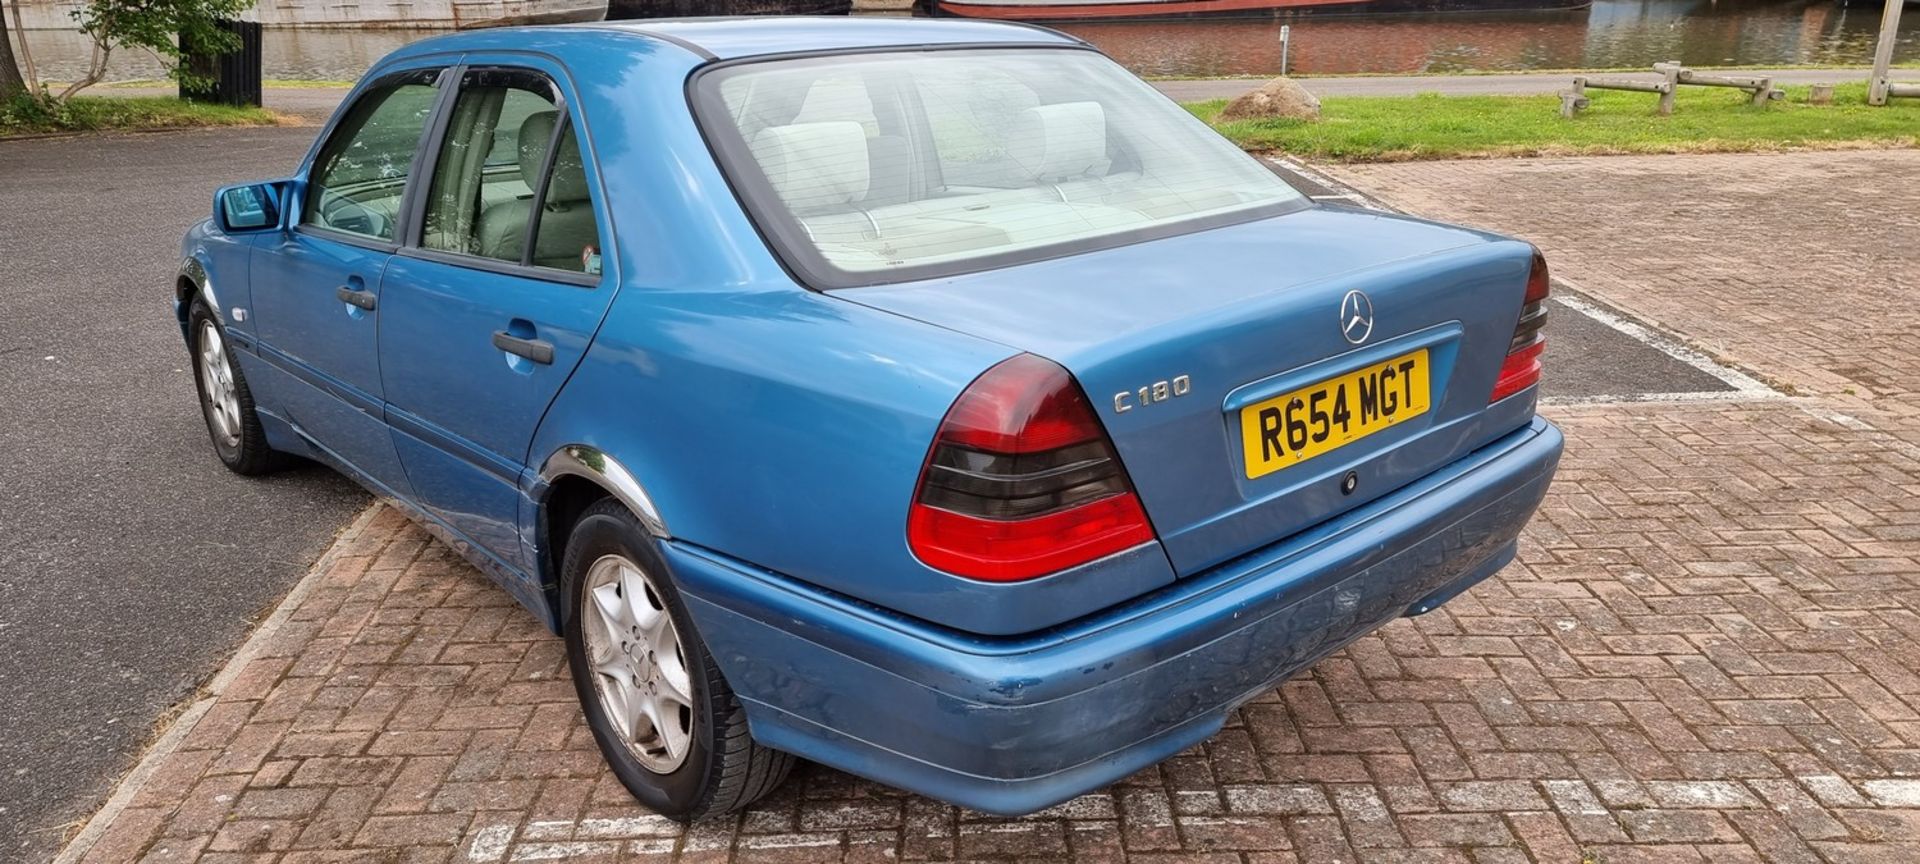 1997 Mercedes Benz W202 C180, Registration number R654 MGT. Chassis number . Engine number . In - Image 3 of 16